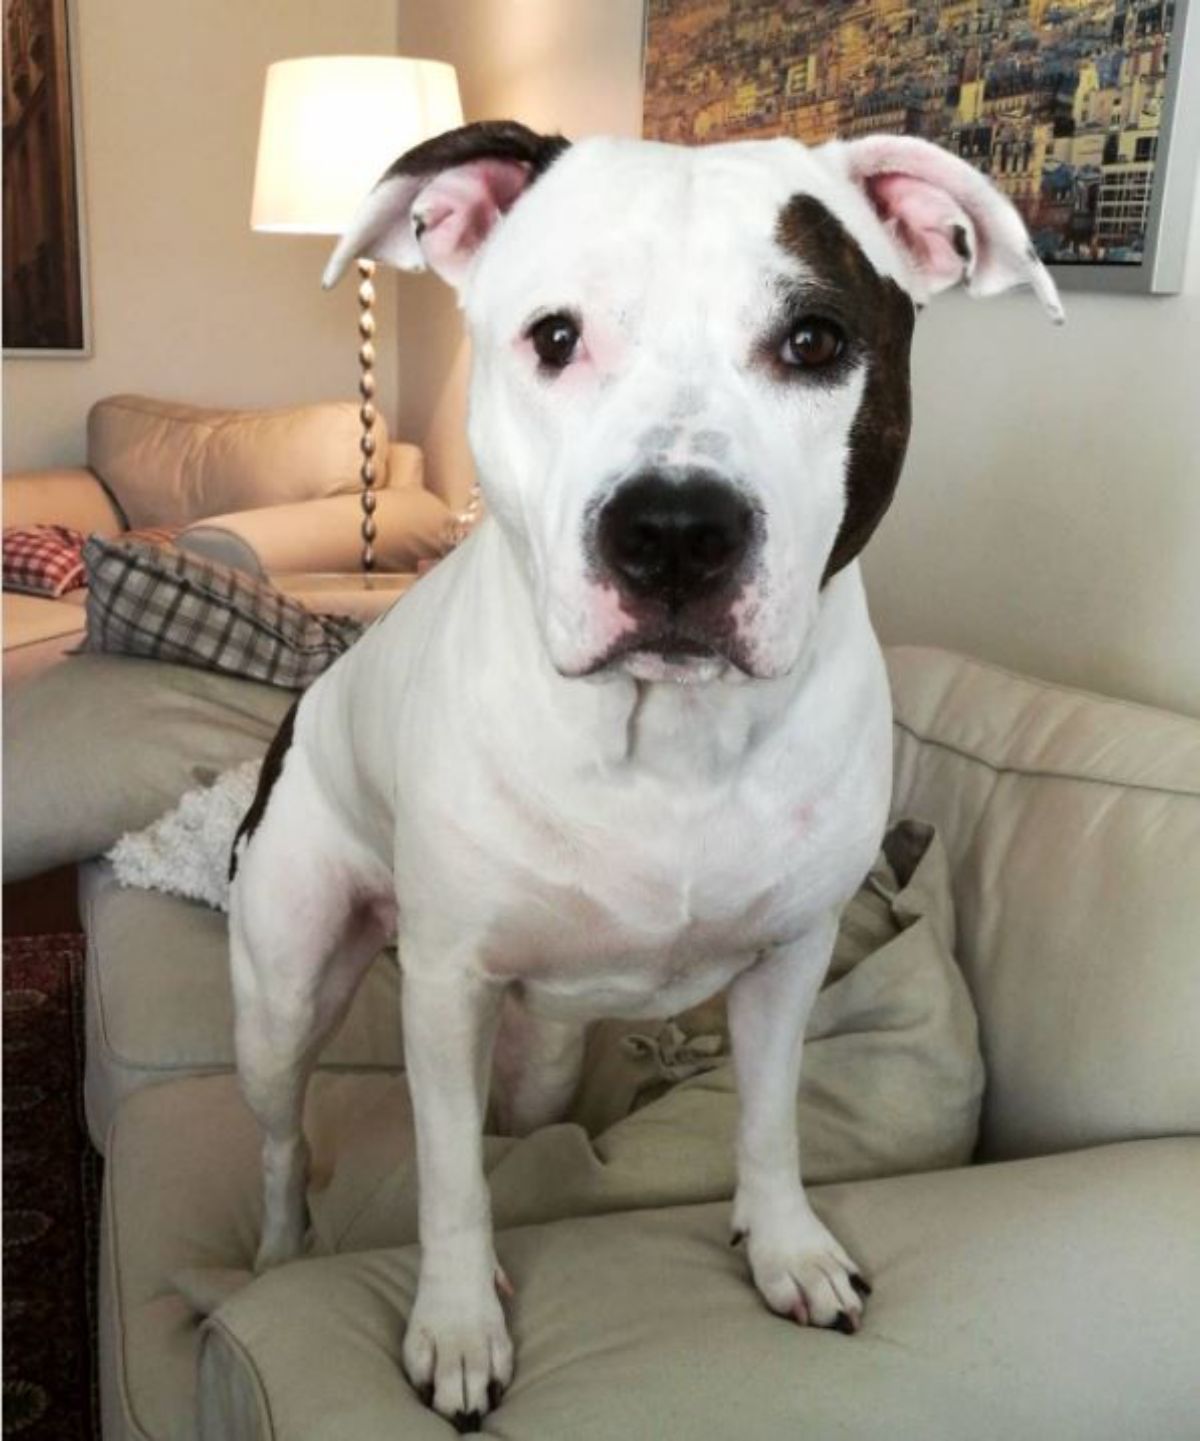 American Staffordshire Terrier standing on top of couch